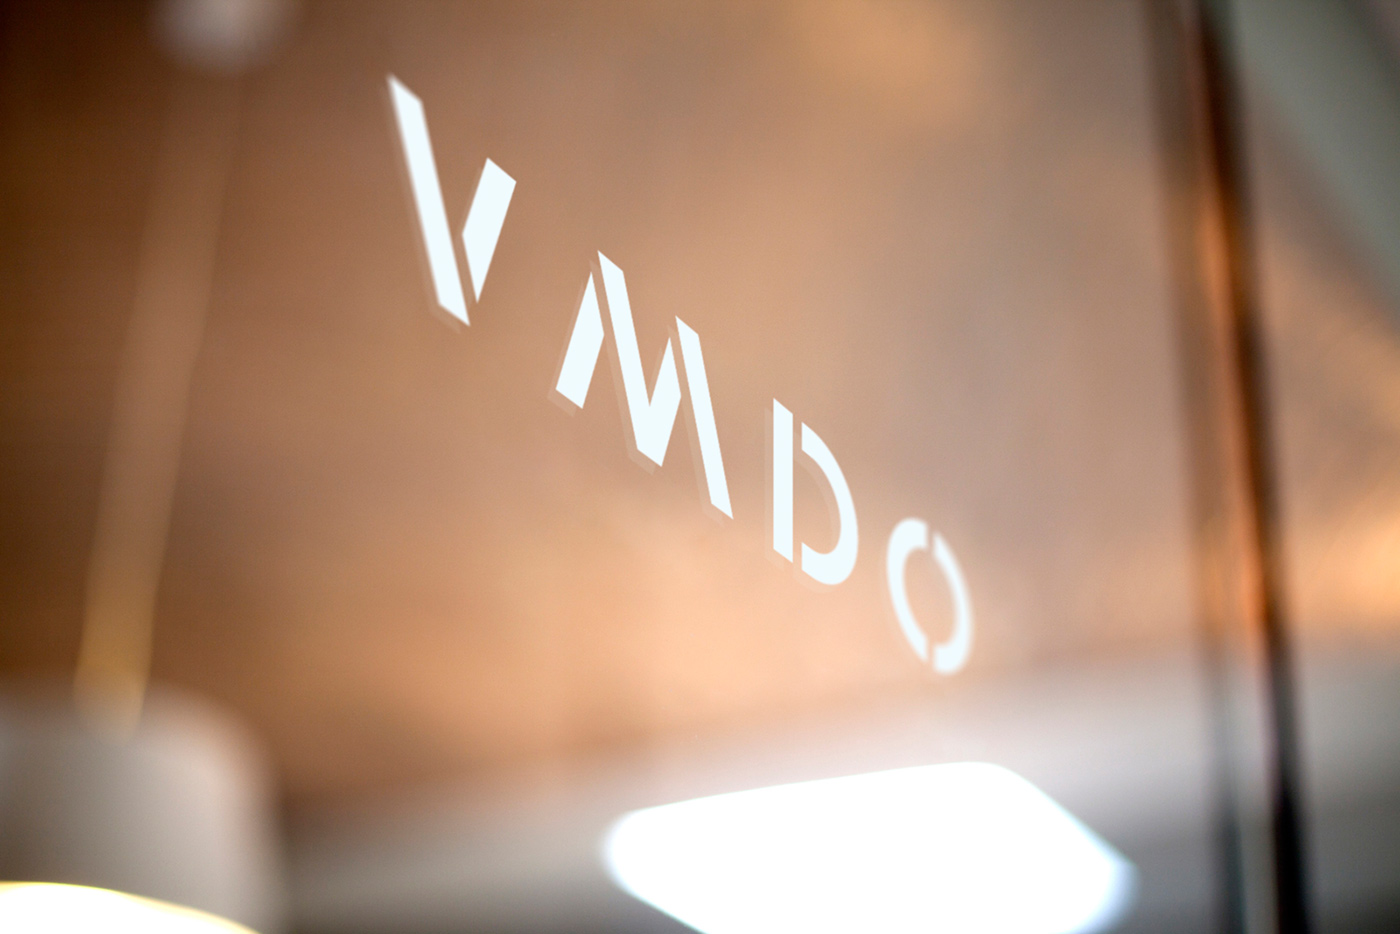 VMDO Architecture Firm Rebrand - After